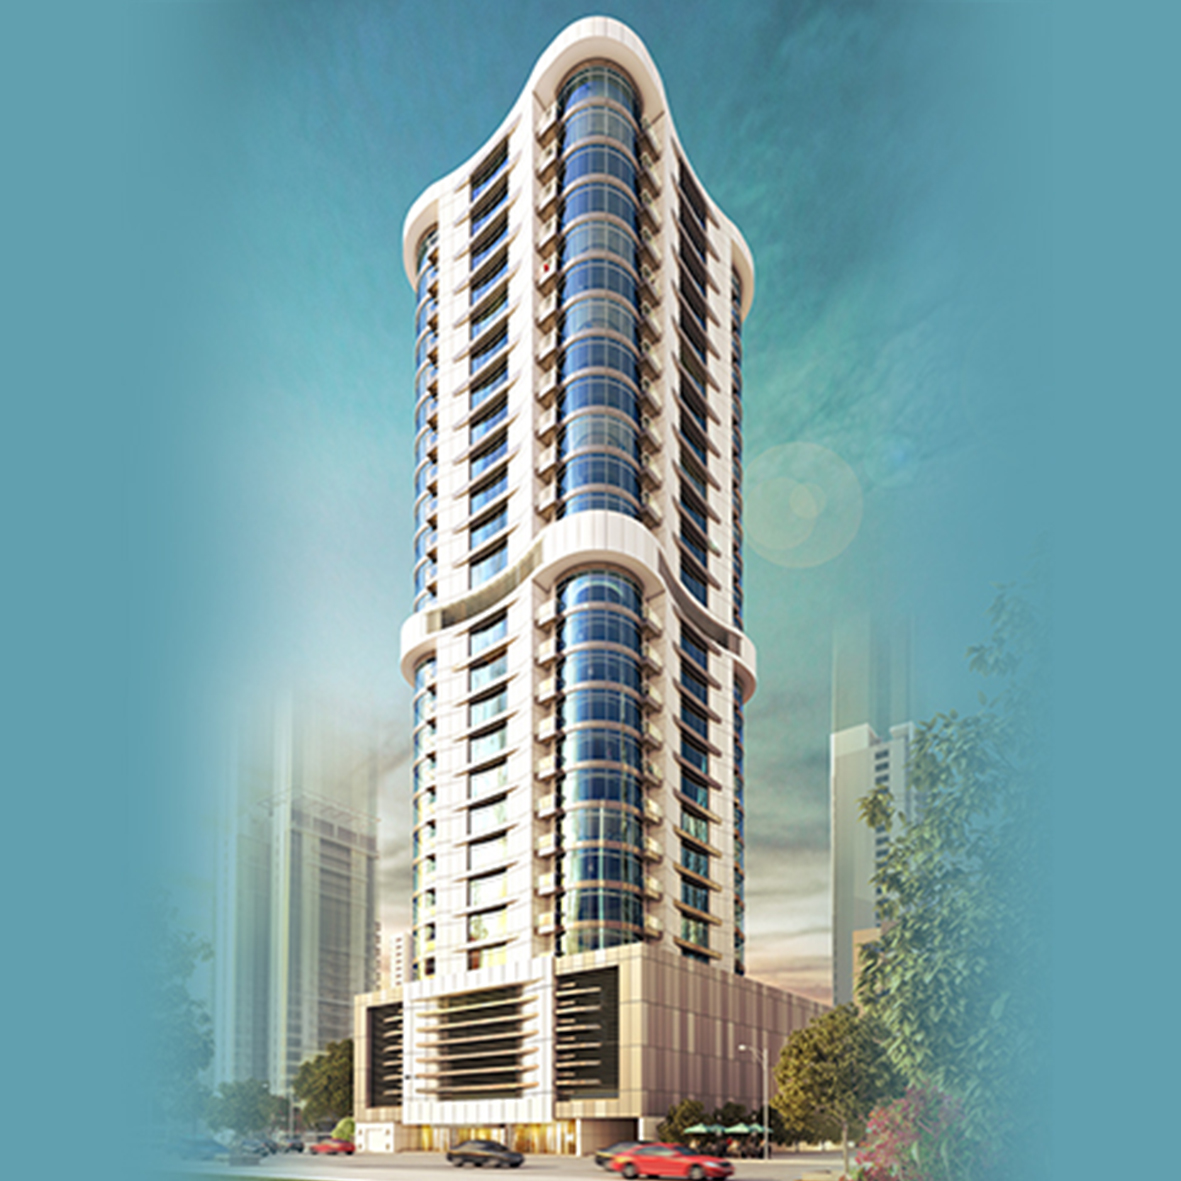 Flats for sale in Juffair